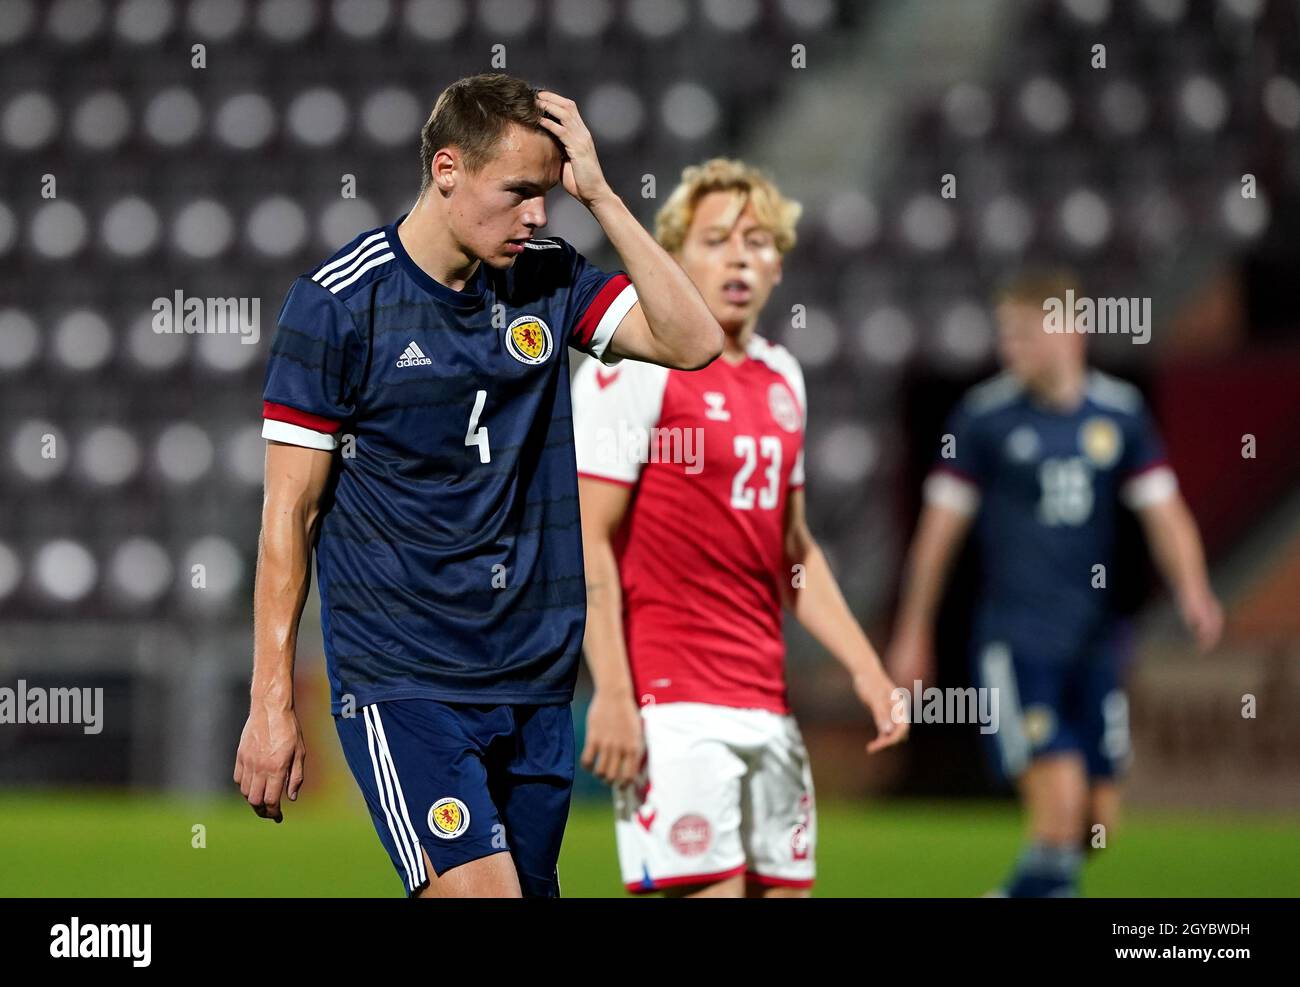 Scotland's Lewis Mayo looks dejected after the UEFA Under-21 Championship Qualifying Round Group I match at Tynecastle Park, Edinburgh. Picture date: Thursday, October 7, 2021. Stock Photo